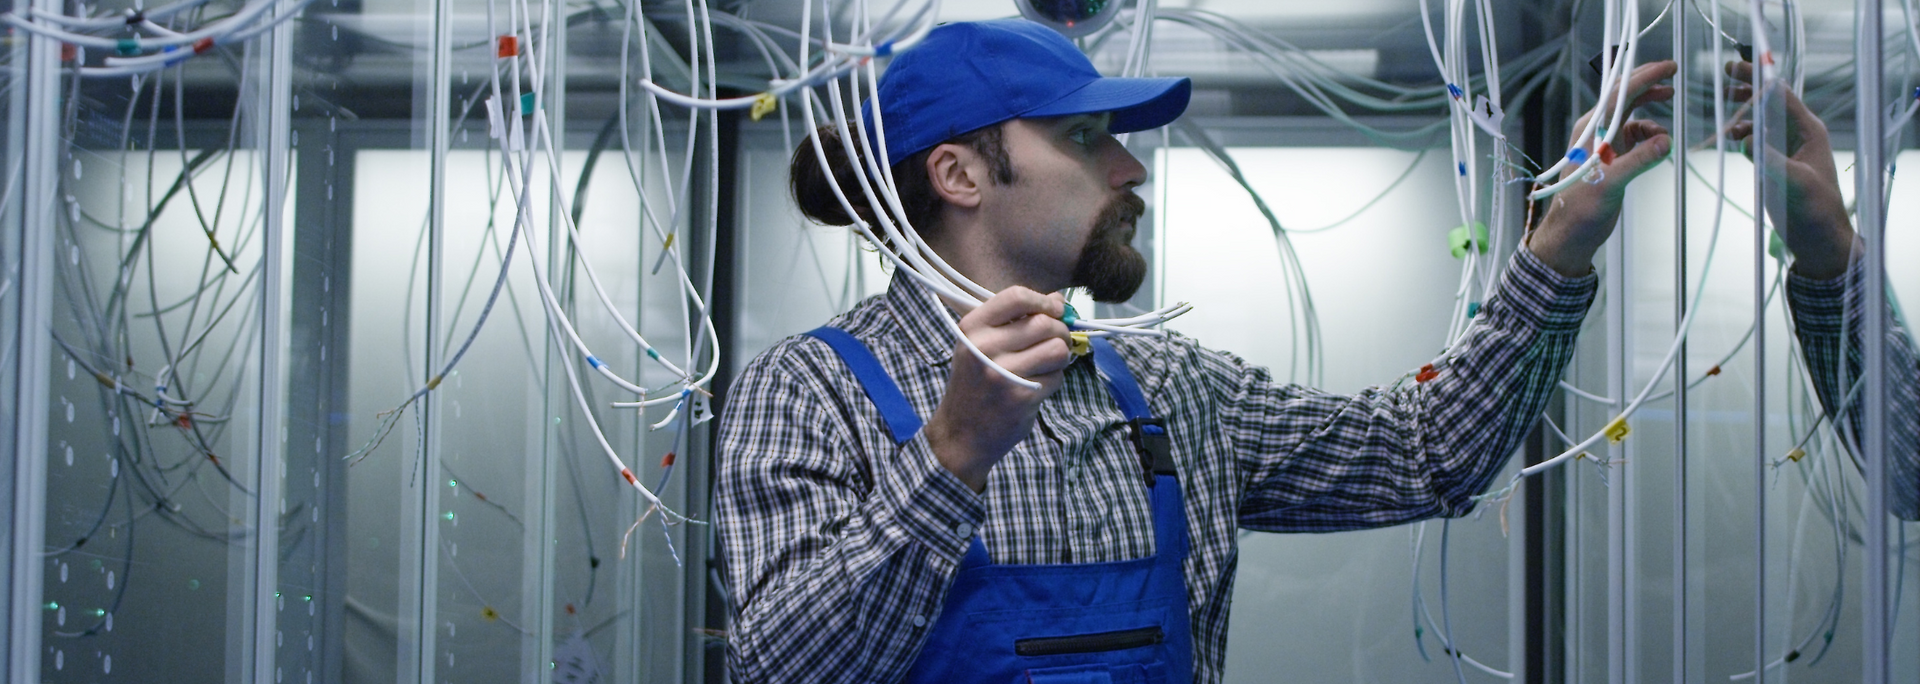 Picture of an IT technician amongst cables, looking perplexed
